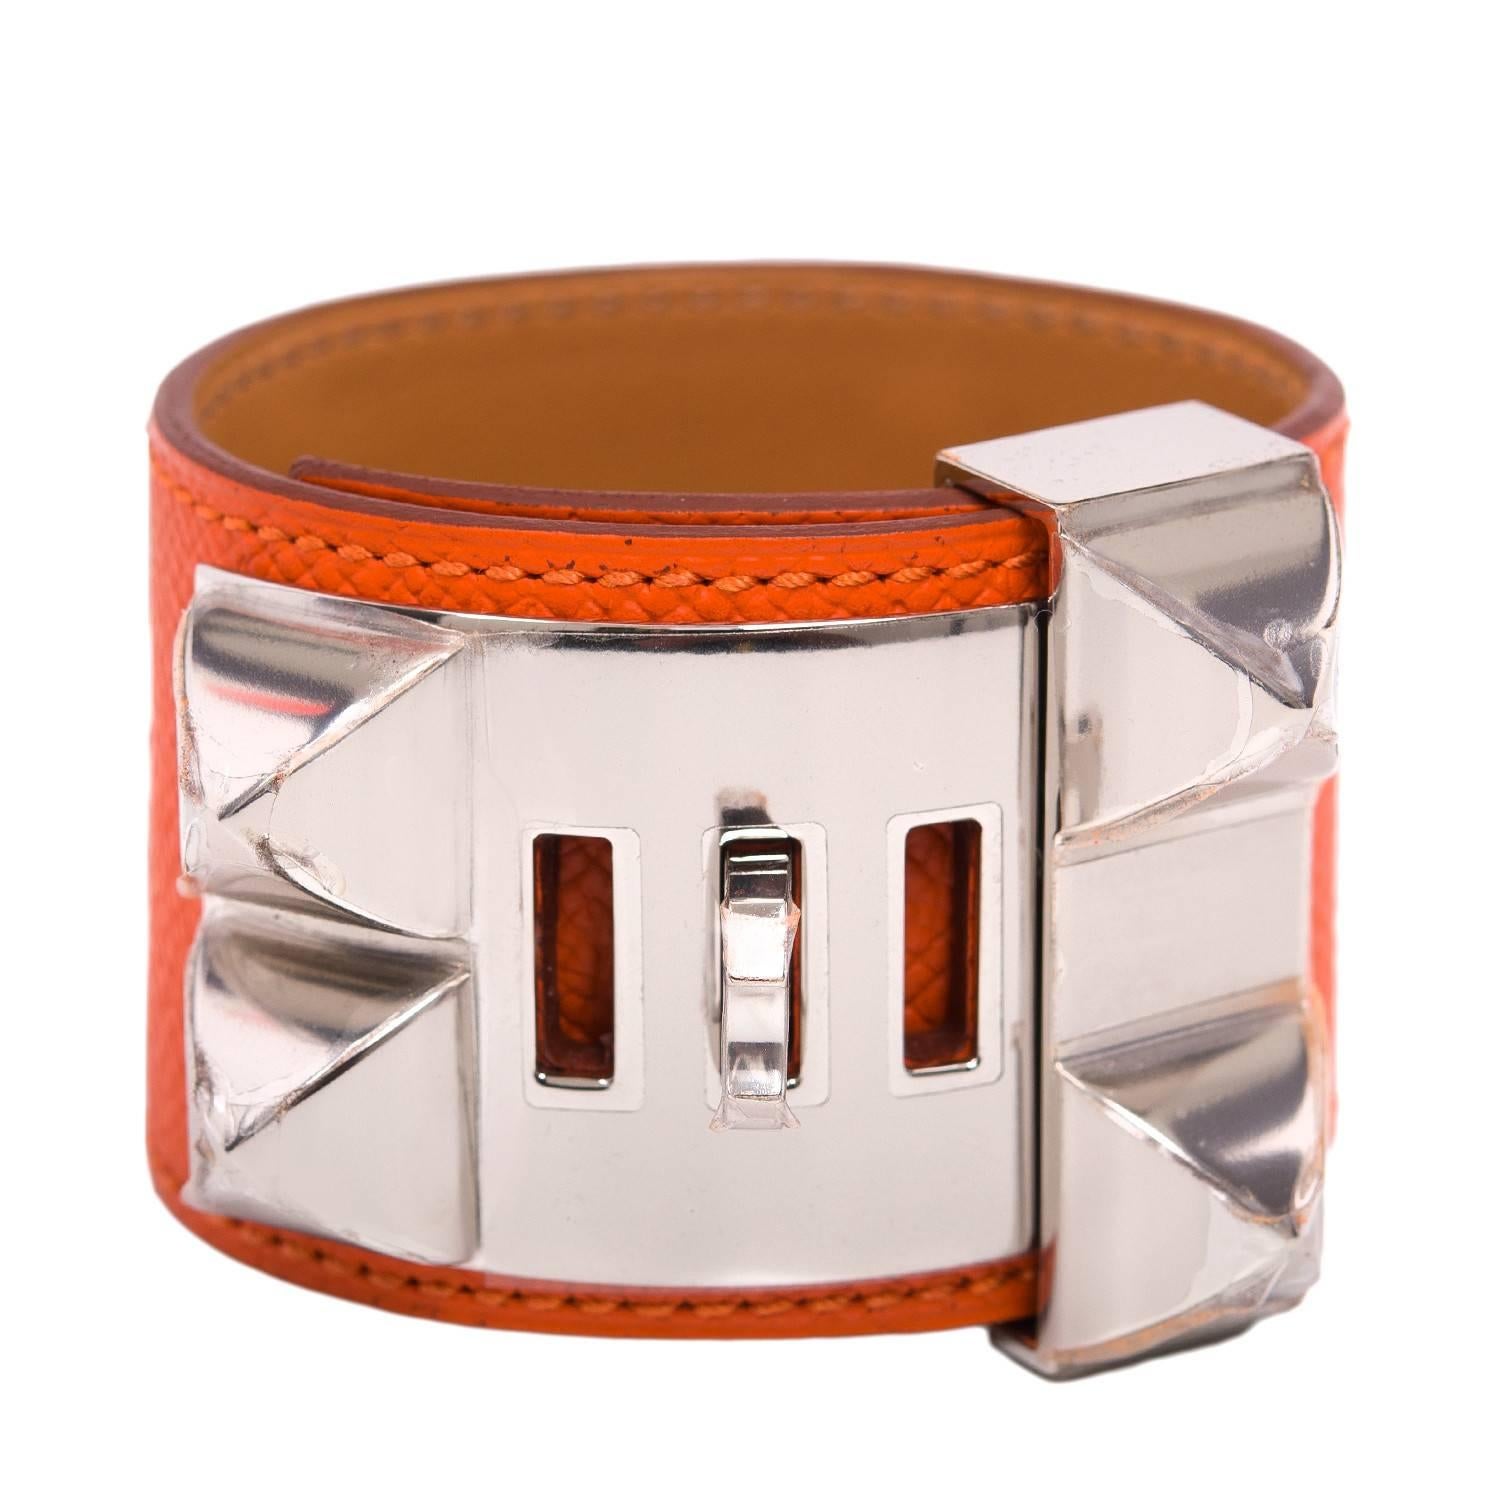 Hermes Feu Epsom Collier De Chien (CDC)Small Bracelet In New Condition For Sale In New York, NY